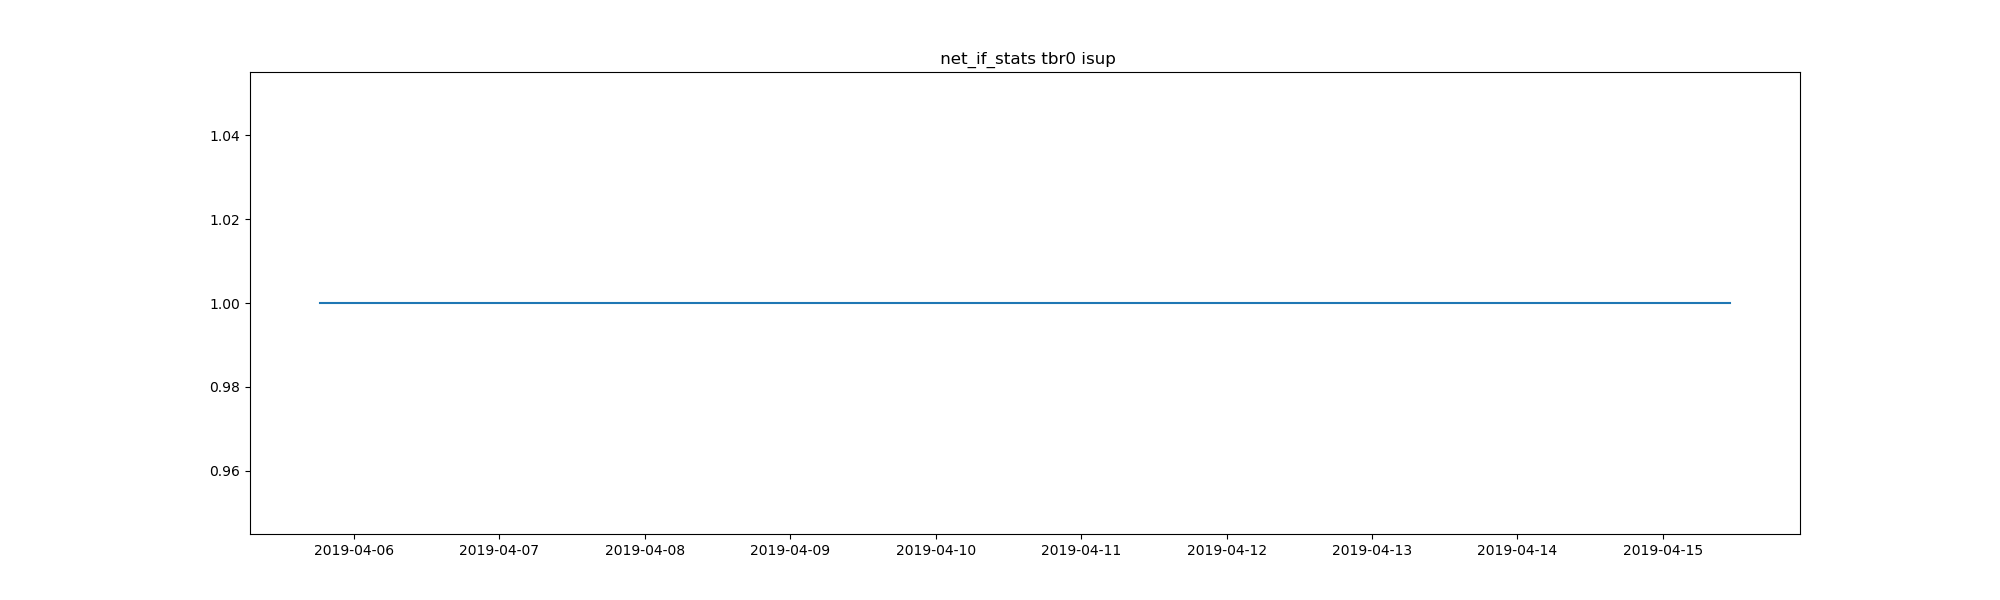 task-network-net_if_stats-tipbr0-enp0s31f6-docker0-wlp4s0-lo-tbr0-isup.png